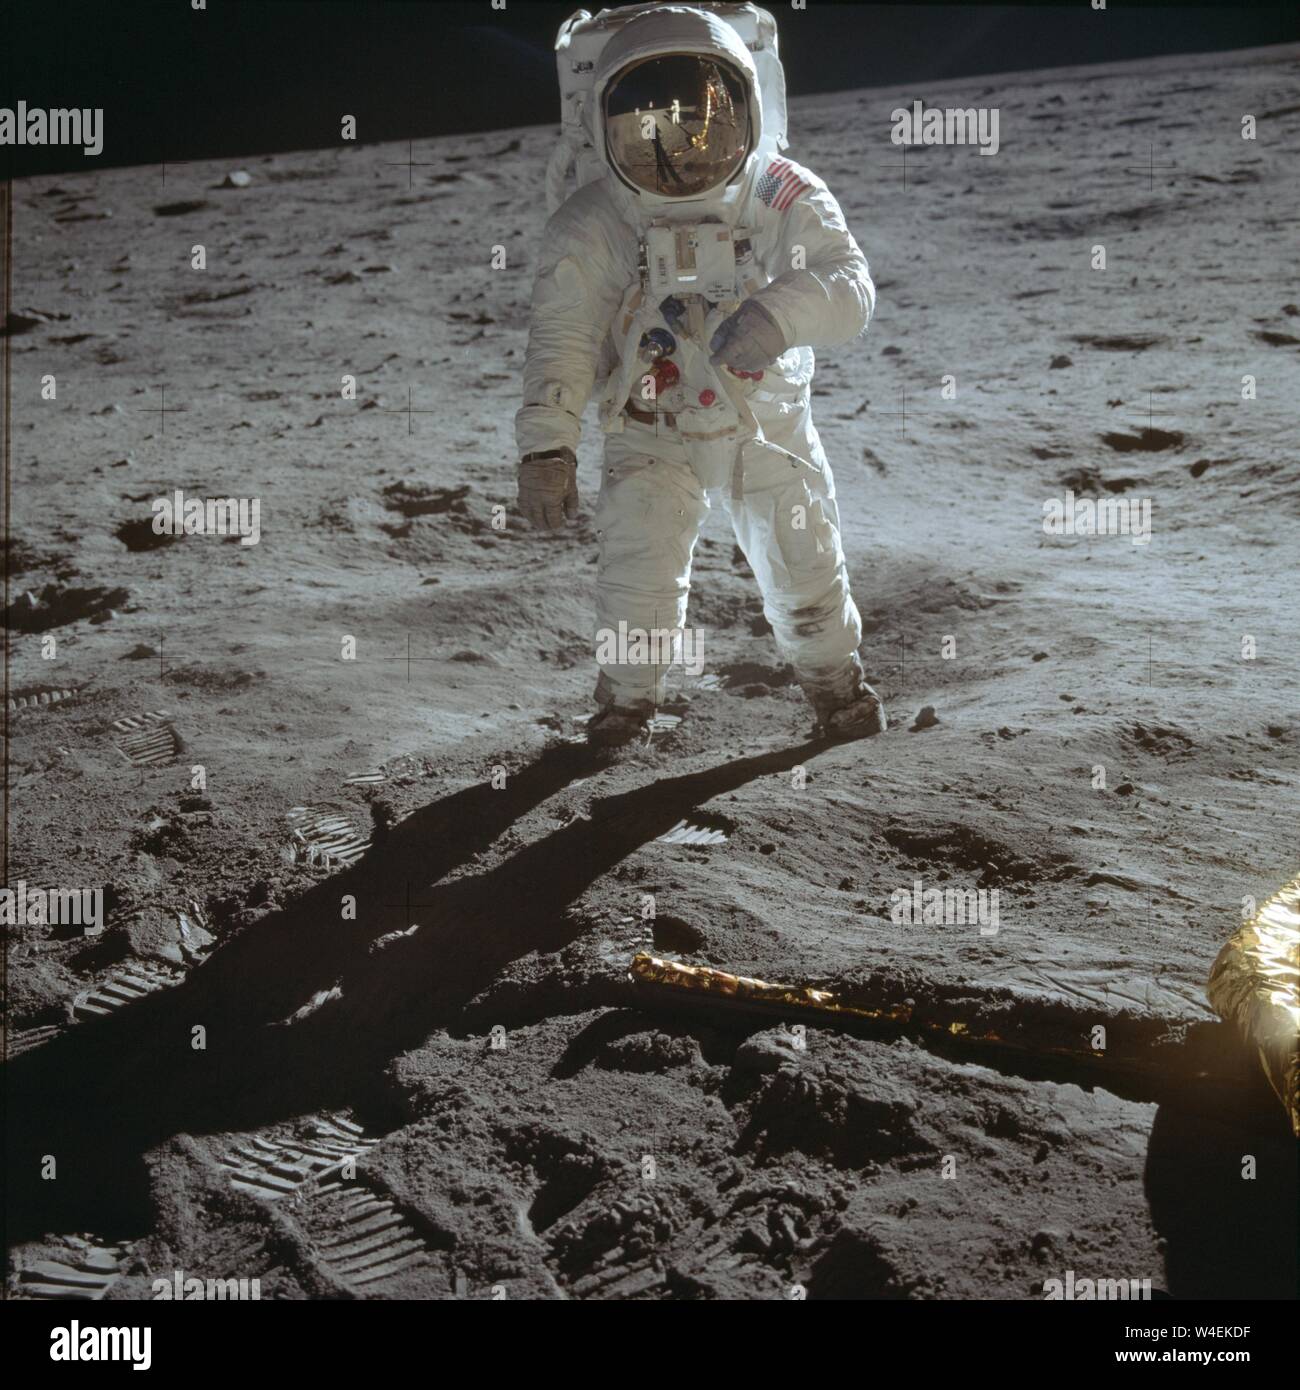 Apollo 11 mission commander Neil Armstrong took this iconic photograph of Buzz Aldrin walking on the moon.  Credit NASA/Capital / MediaPunch  ** USA ONLY** Stock Photo